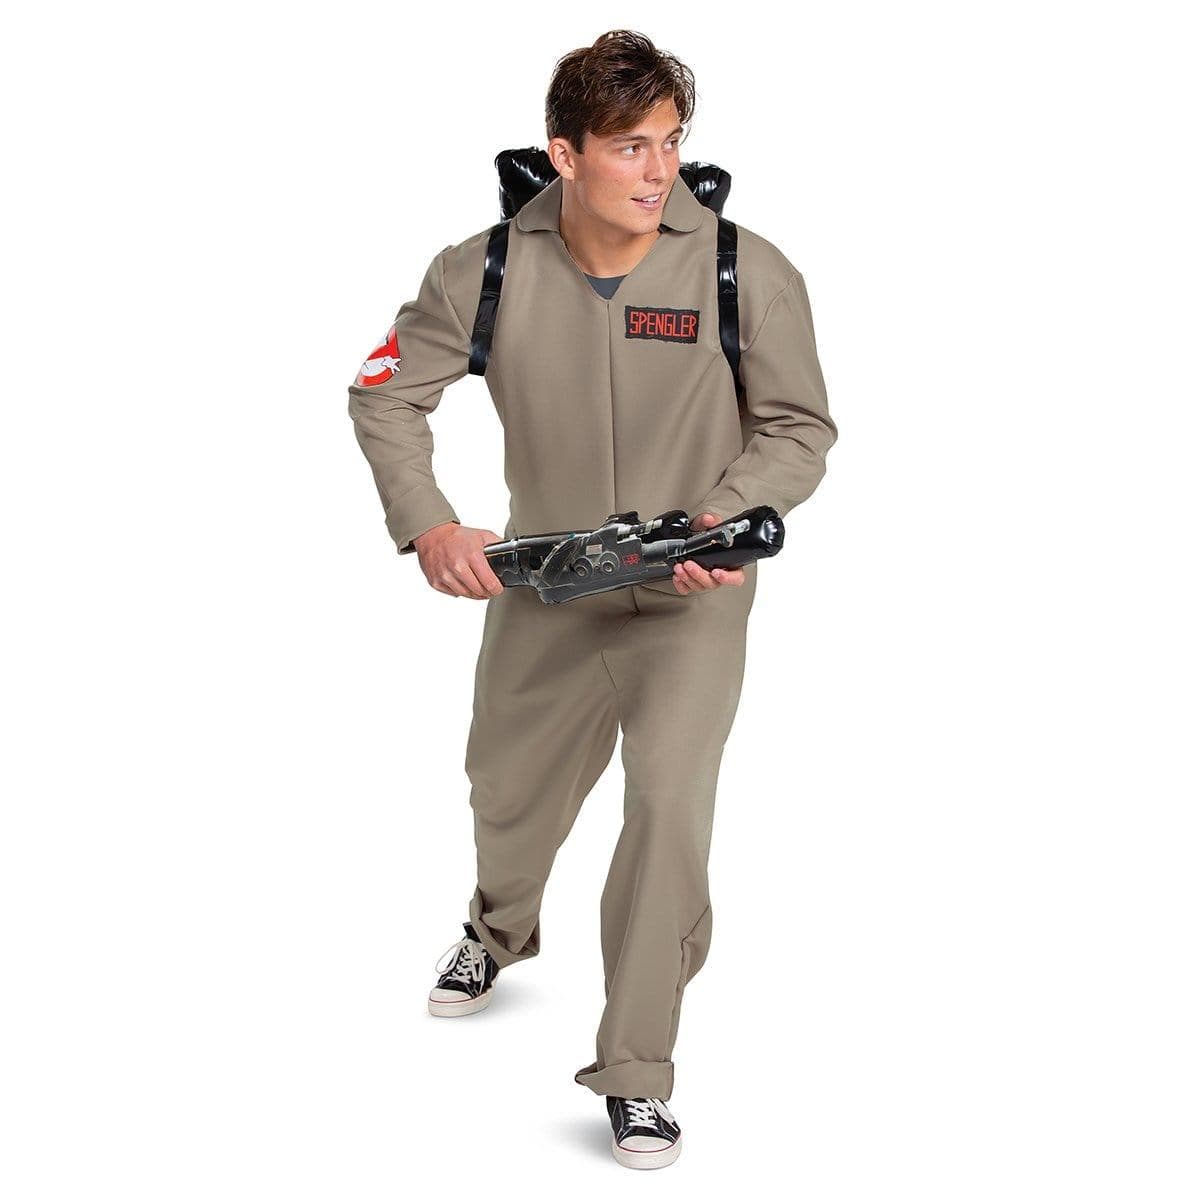 Buy Costumes Egon Spengler Classique Costume for Plus Size Adults, Ghostbusters: Afterlife sold at Party Expert